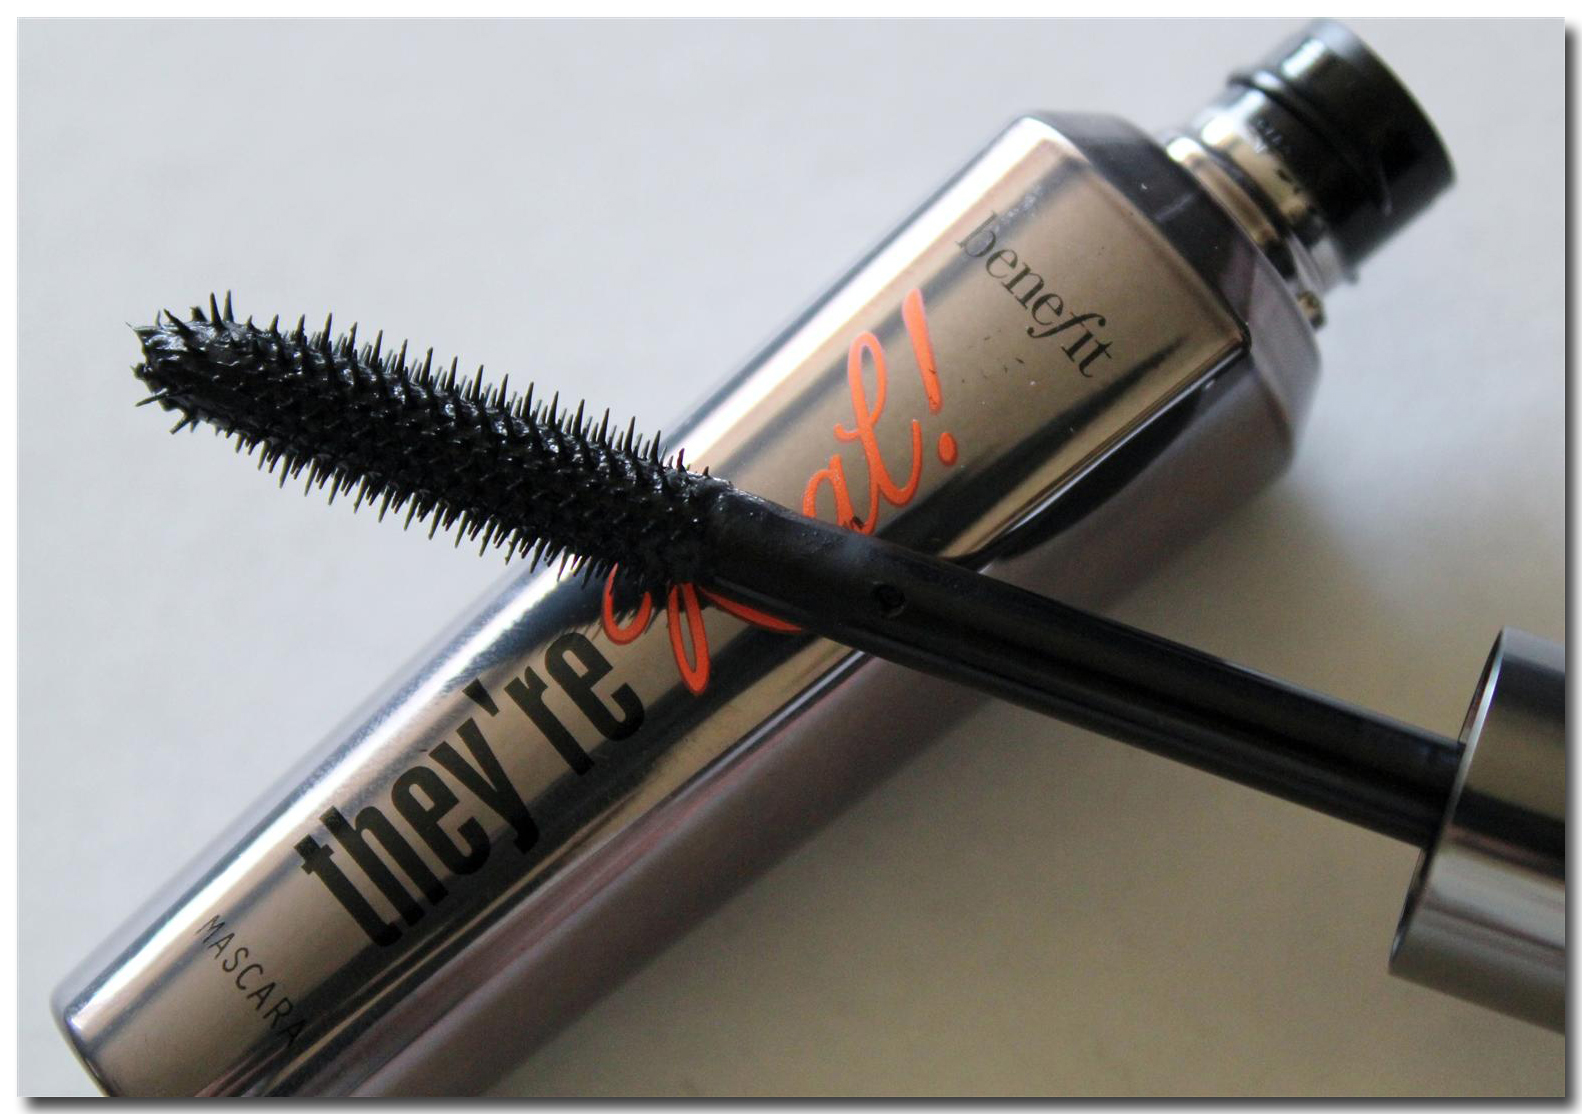 Review of Benefit Cosmetics They39;Re Real! Mascara